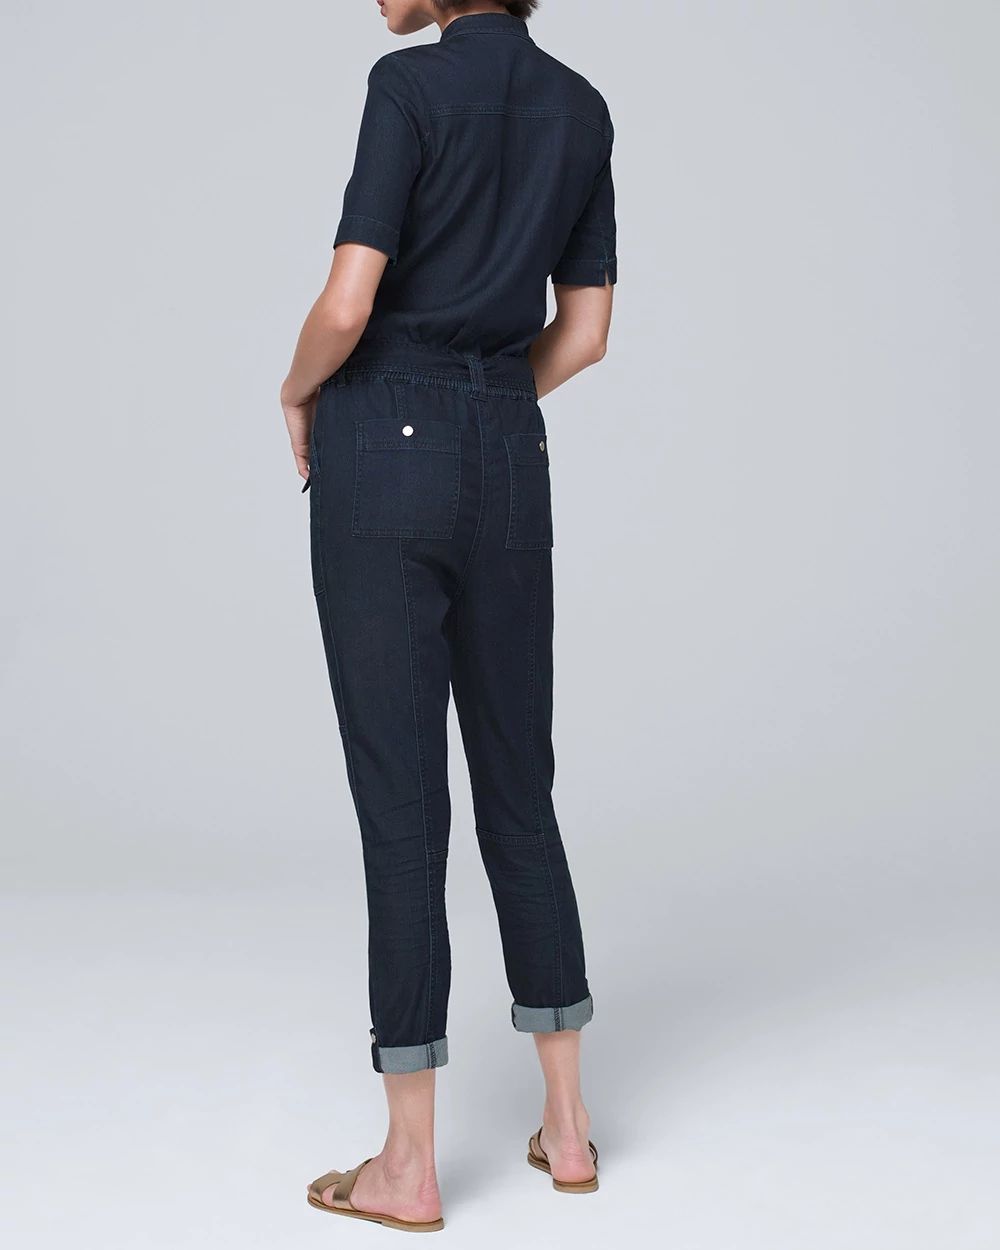 Soft Denim Cropped Jumpsuit click to view larger image.